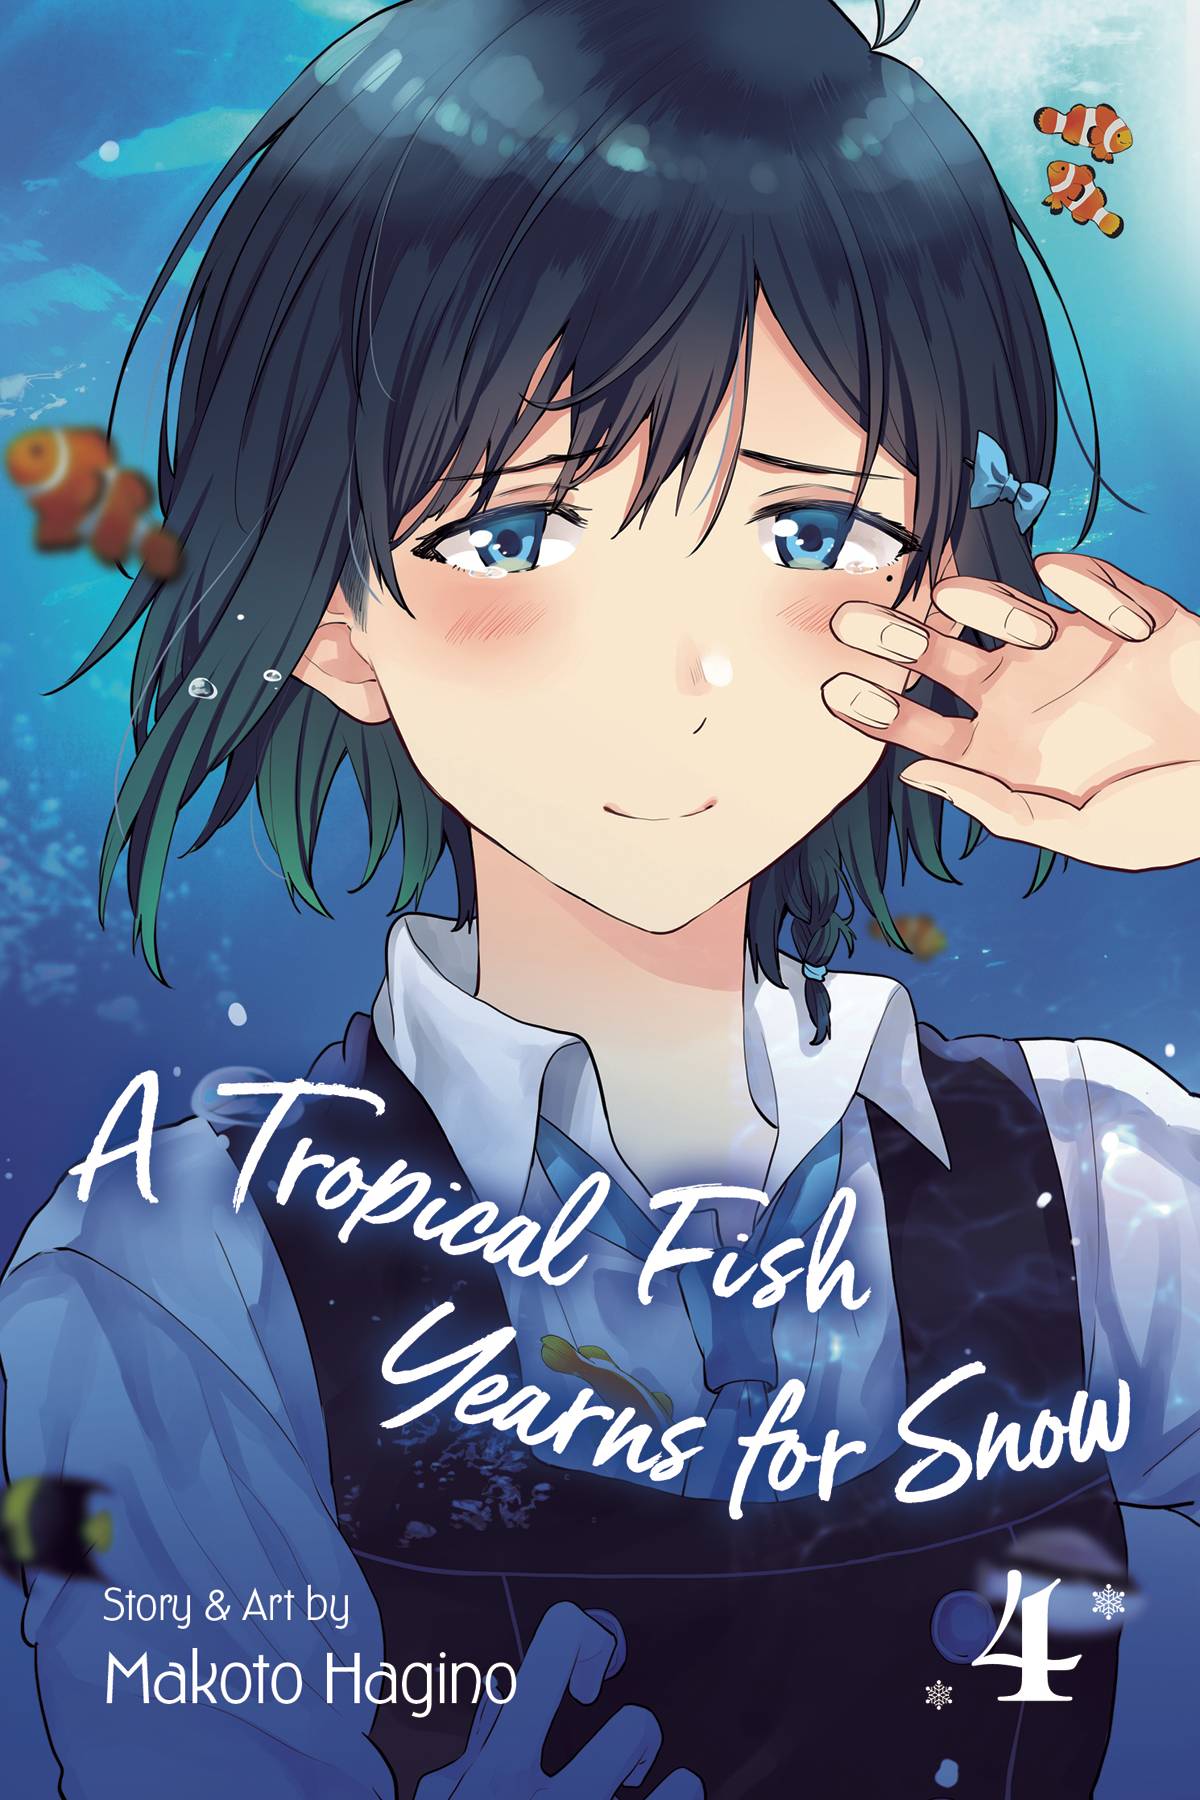 A Tropical Fish Yearns for Snow Volume 4